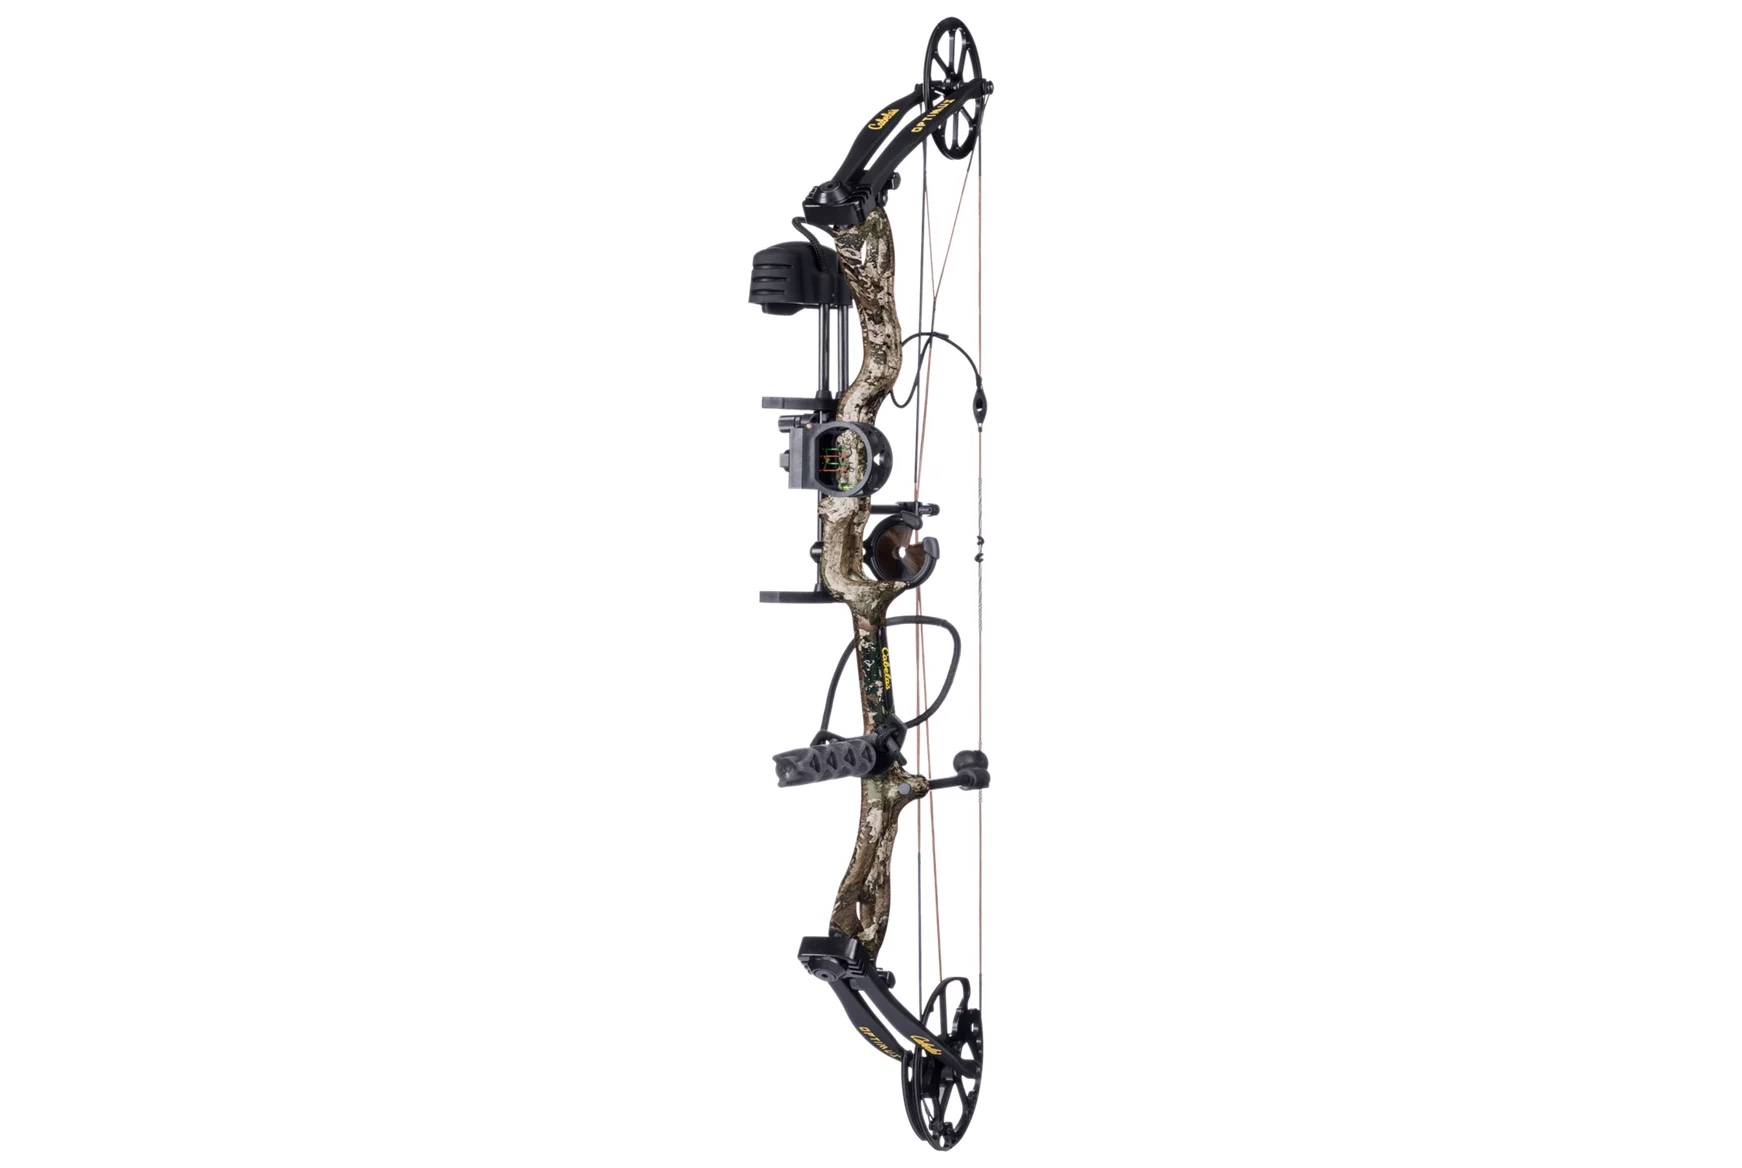 The Best Cabela’s Deals for Bowhunting of 2022